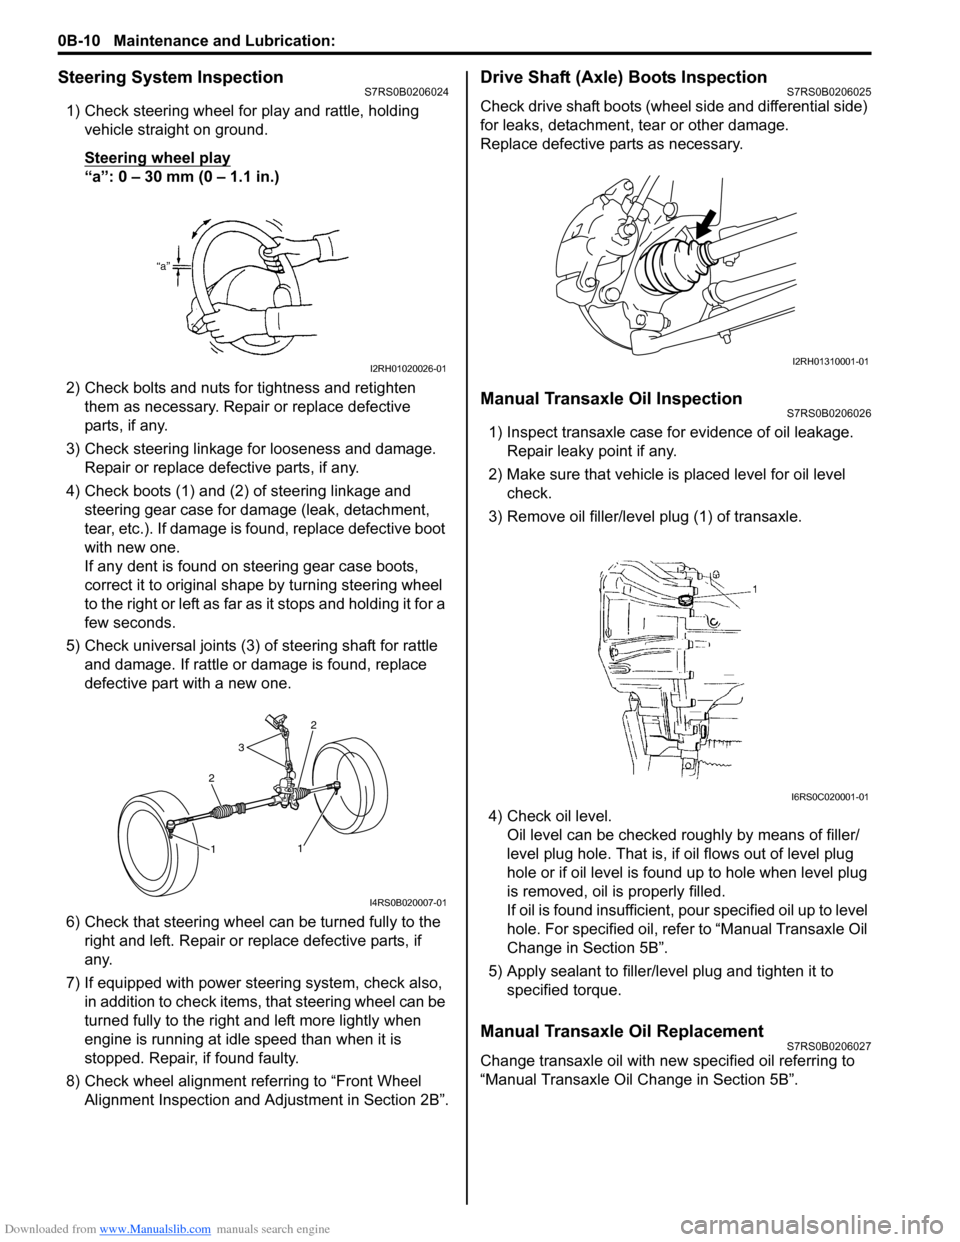 SUZUKI SWIFT 2006 2.G Service Workshop Manual Downloaded from www.Manualslib.com manuals search engine 0B-10 Maintenance and Lubrication: 
Steering System InspectionS7RS0B0206024
1) Check steering wheel for play and rattle, holding vehicle straig